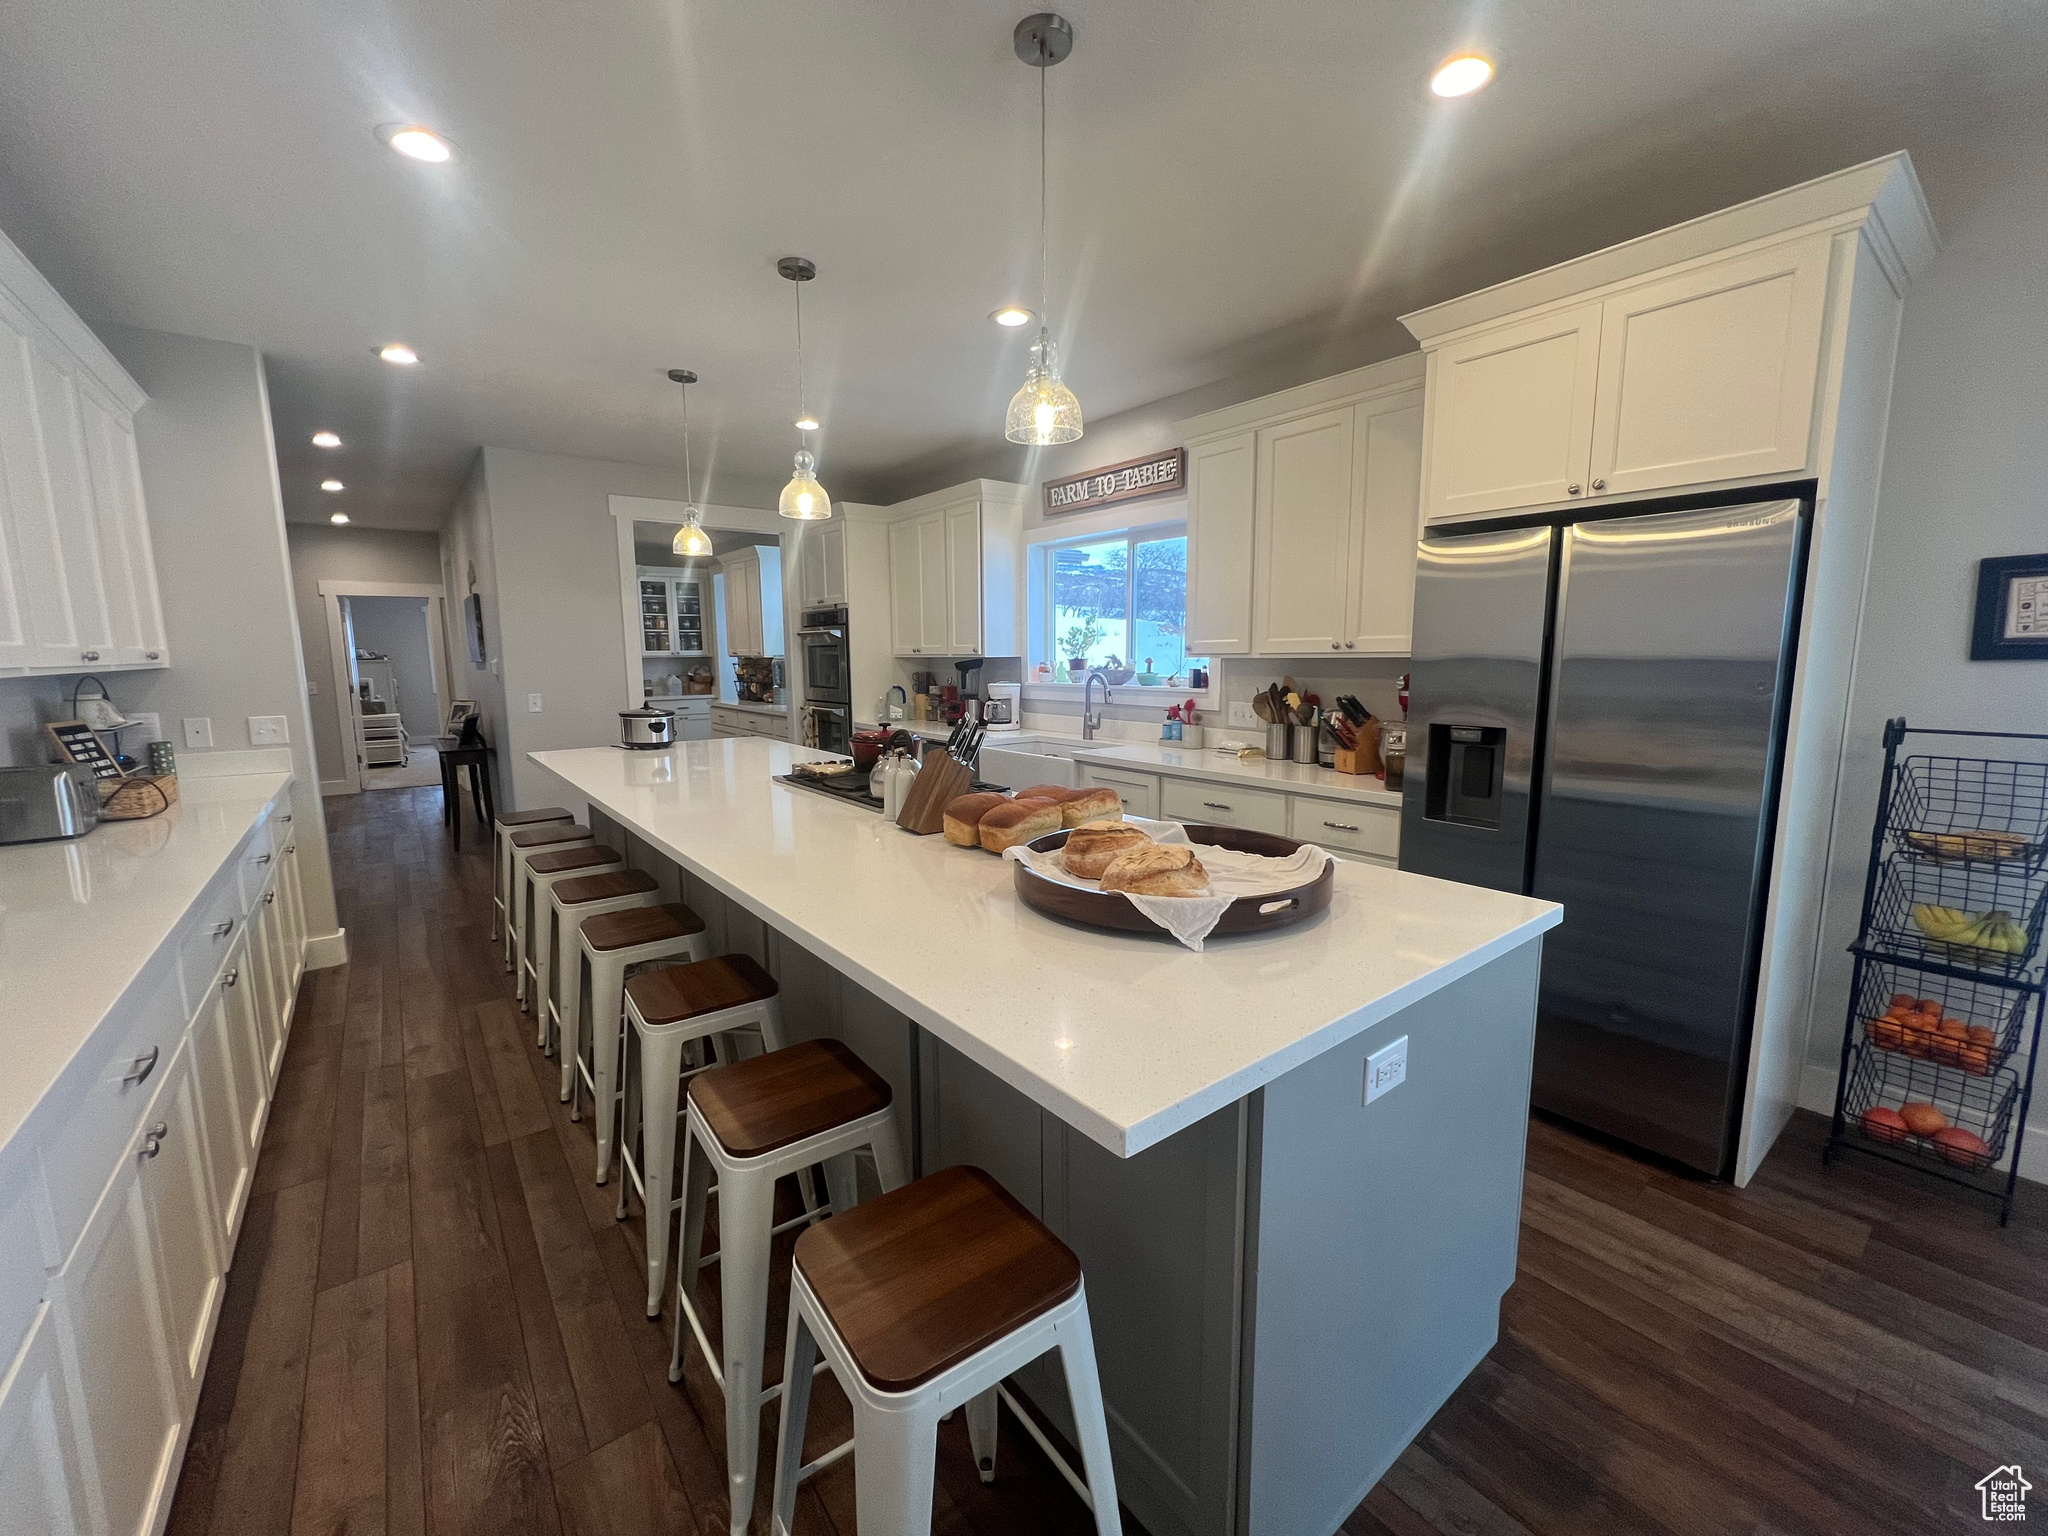 Kitchen featuring hanging light fixtures, appliances with stainless steel finishes, dark wood-type flooring, and white cabinets